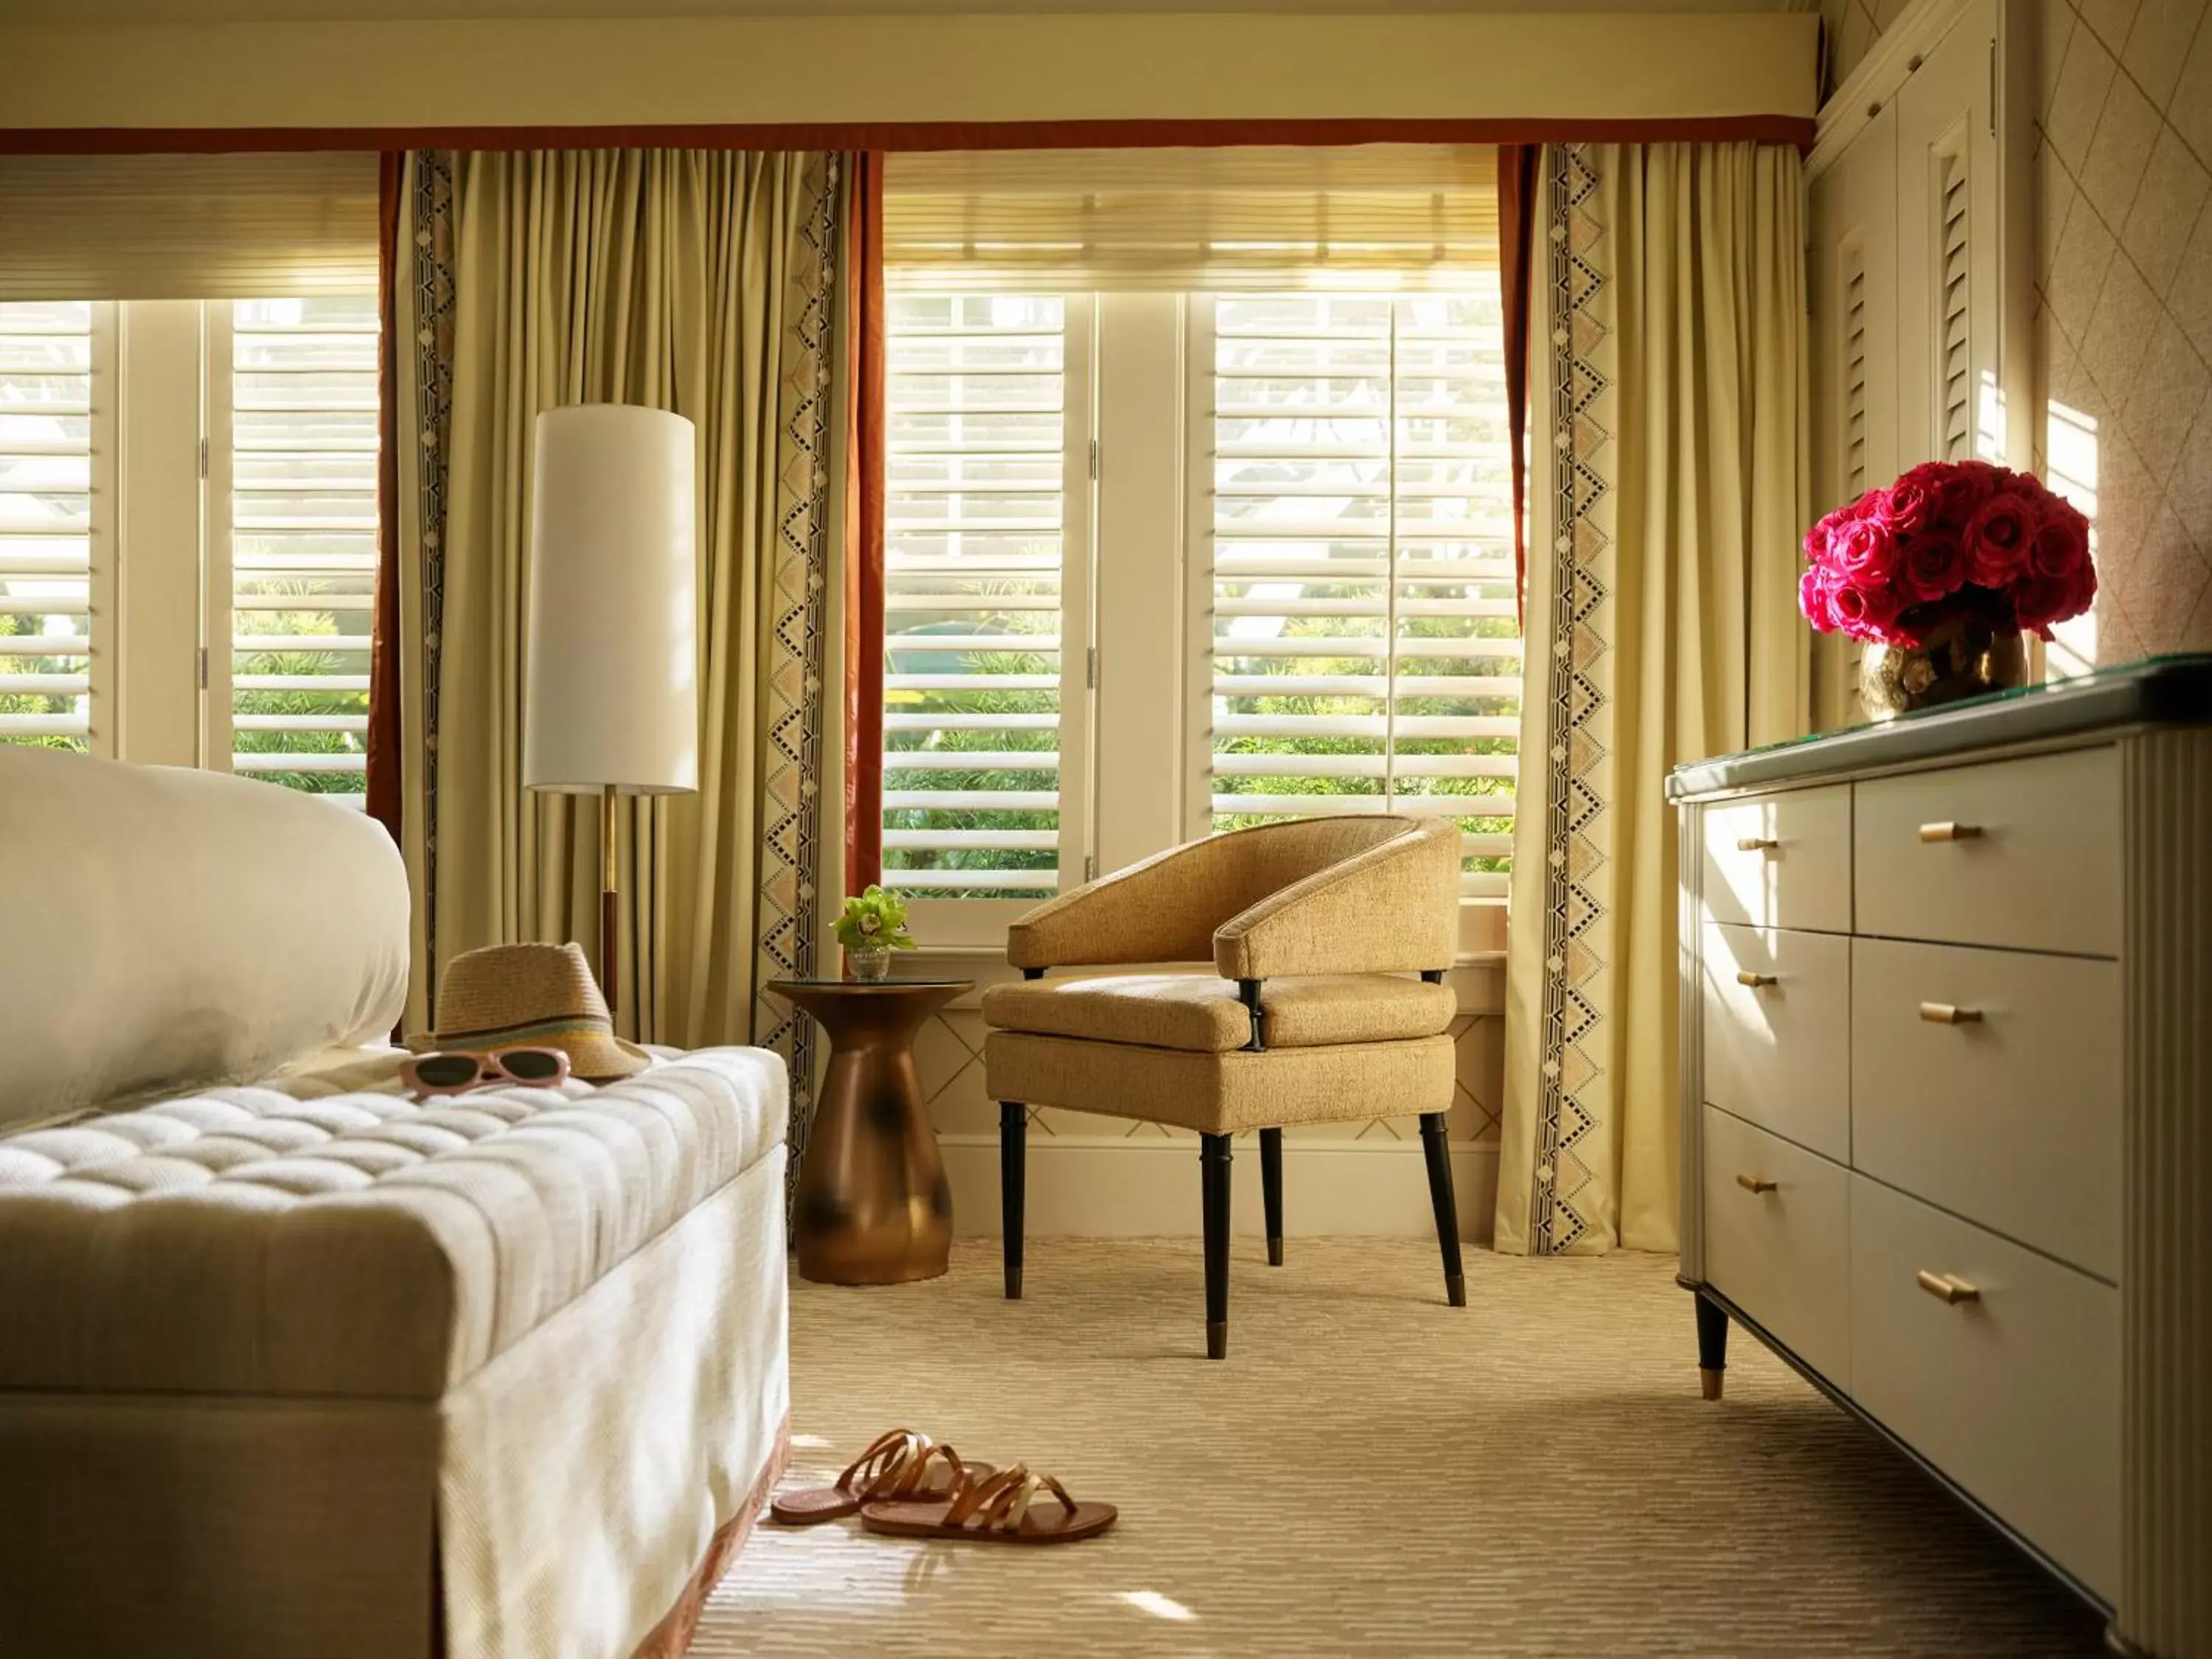 Bedroom, Seating Area in The Beverly Hills Hotel - Dorchester Collection